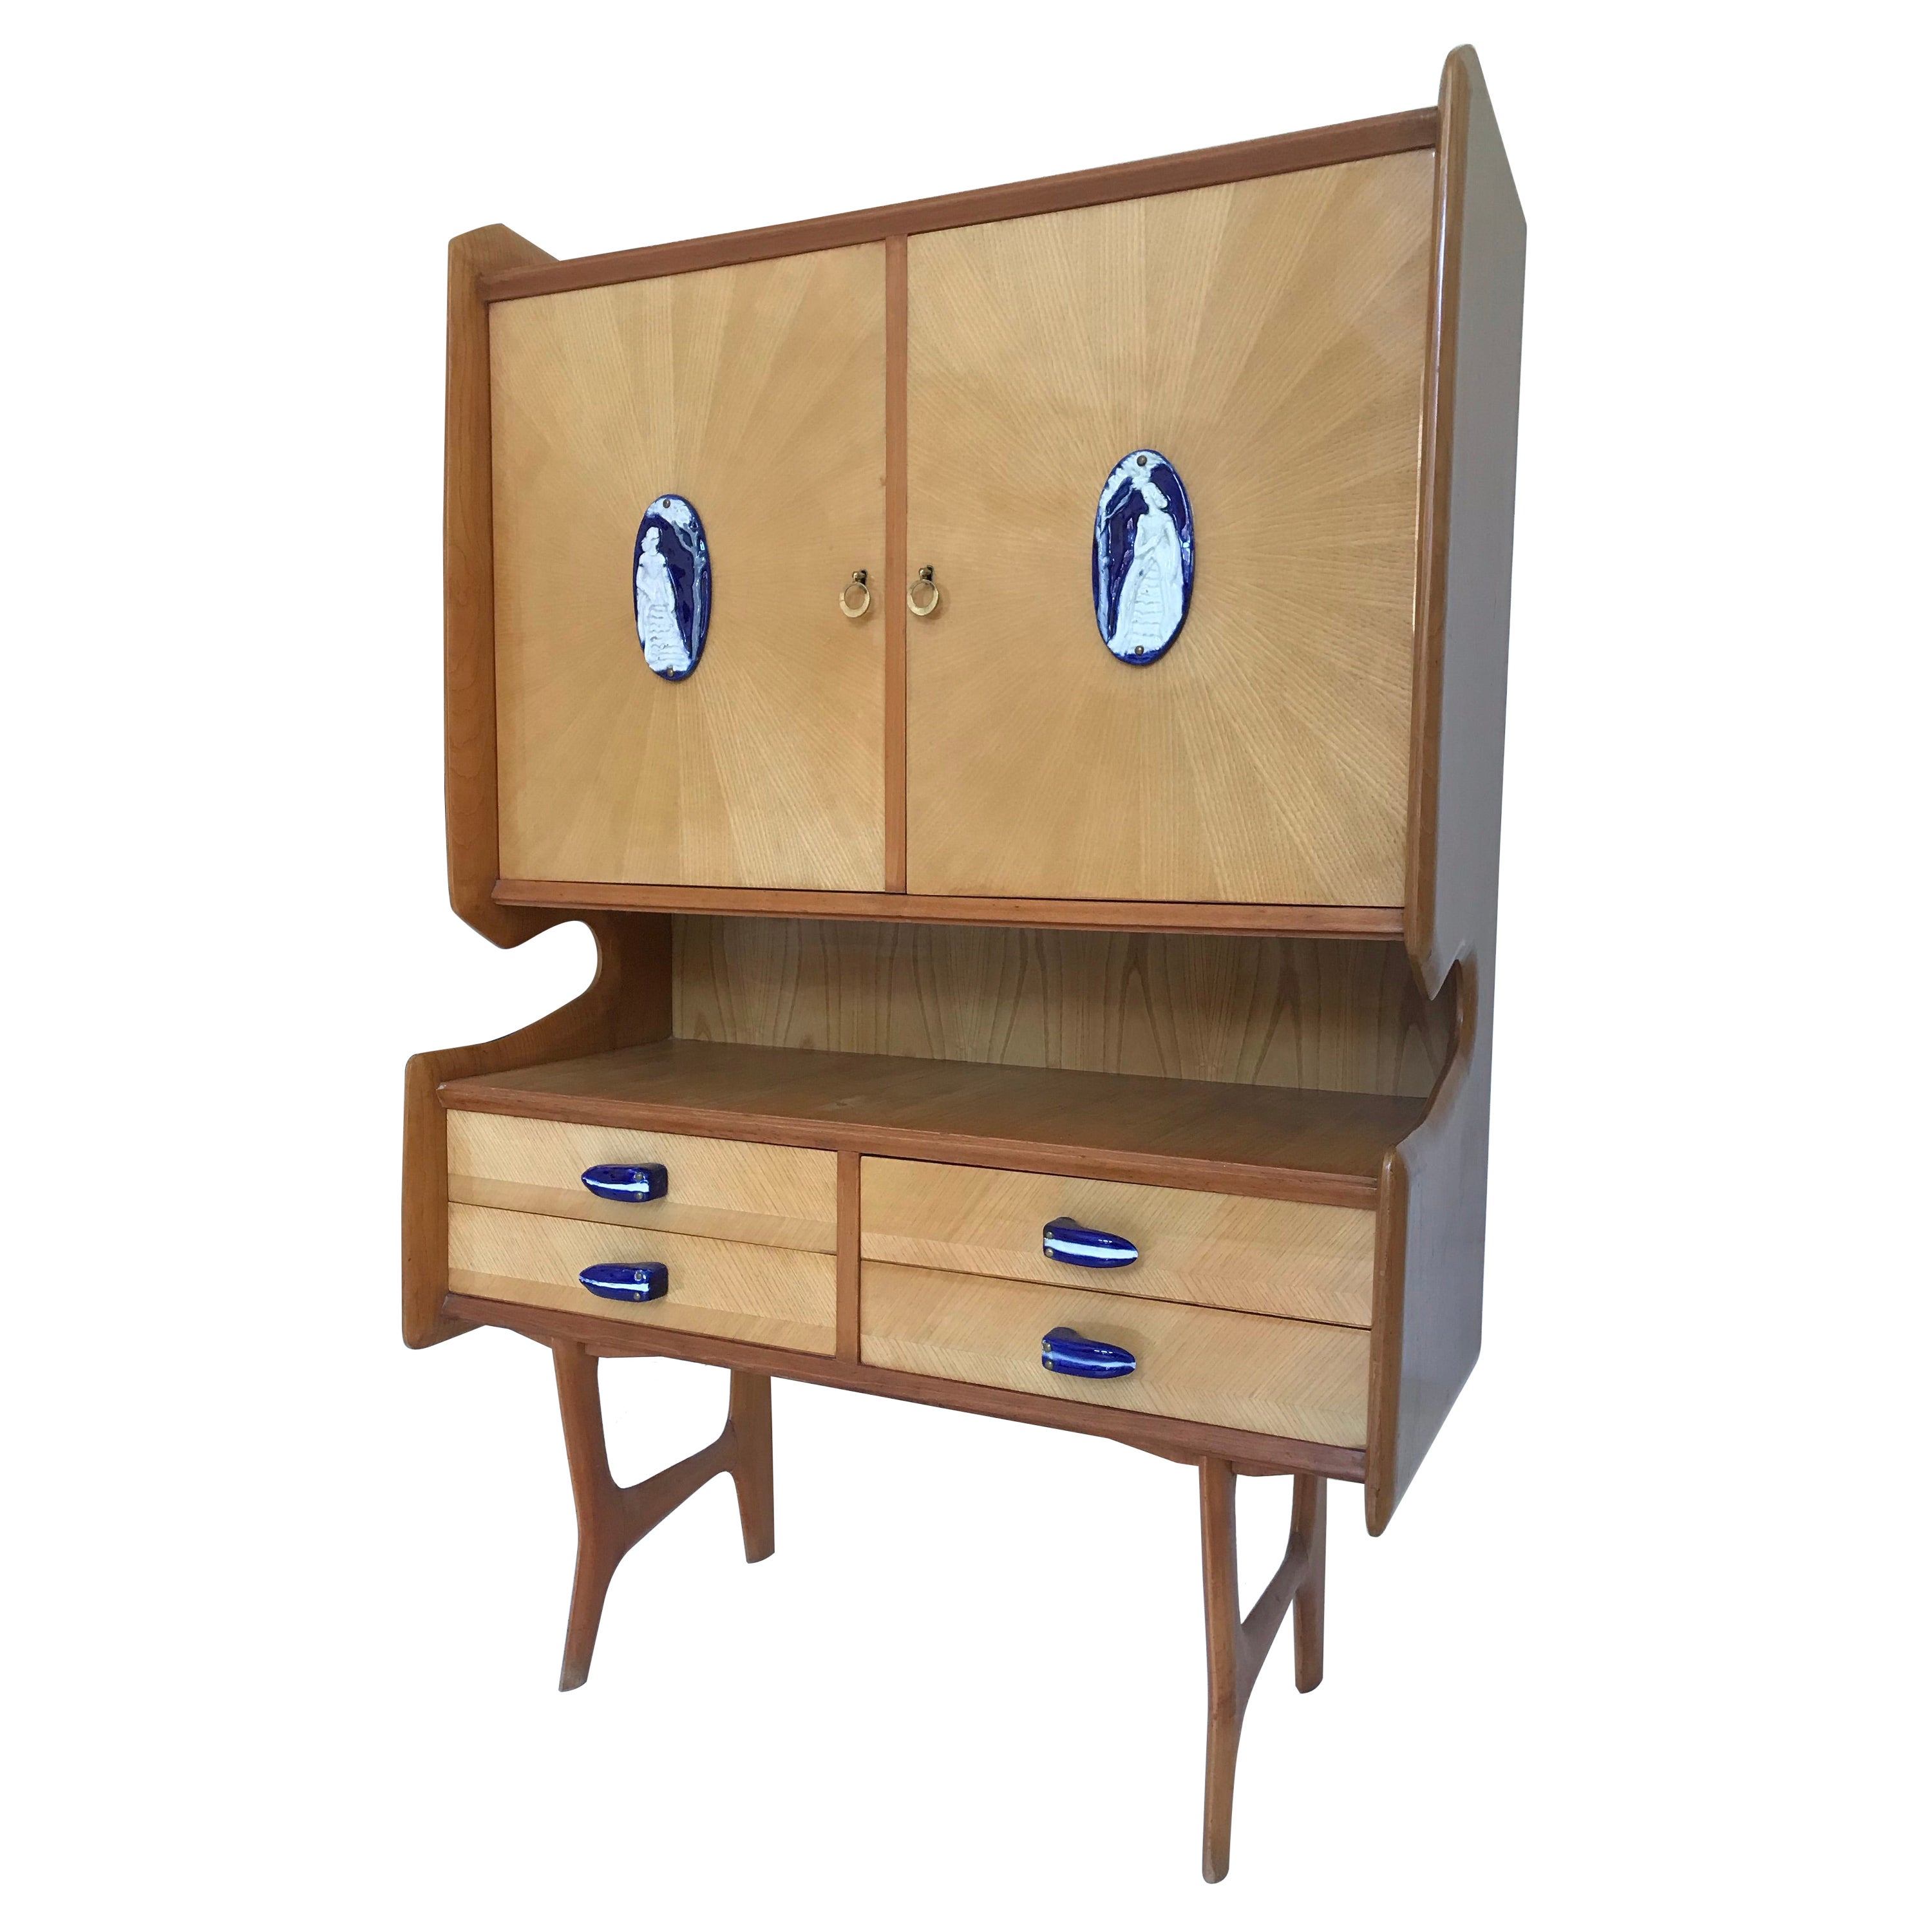 Italian Mid-Century Sideboard in style of Ico Parisi  For Sale